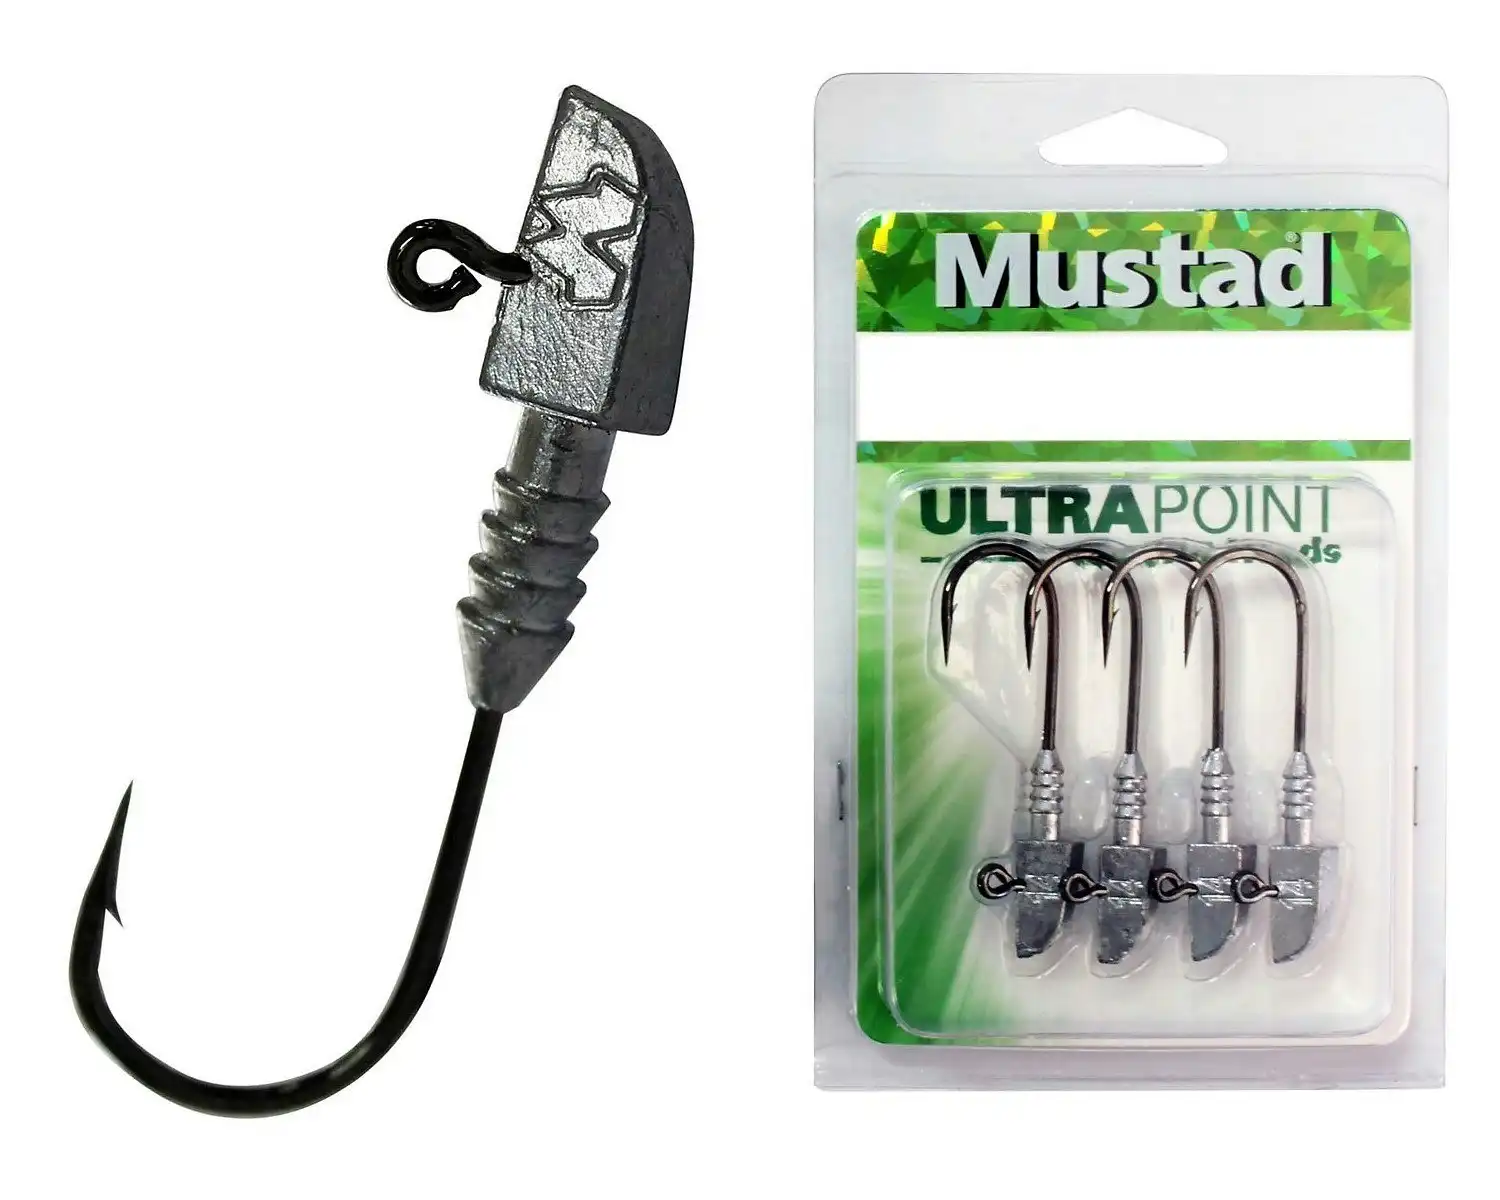 1 Packet of Size 2 Mustad Darter Jigheads - Choose the Weight